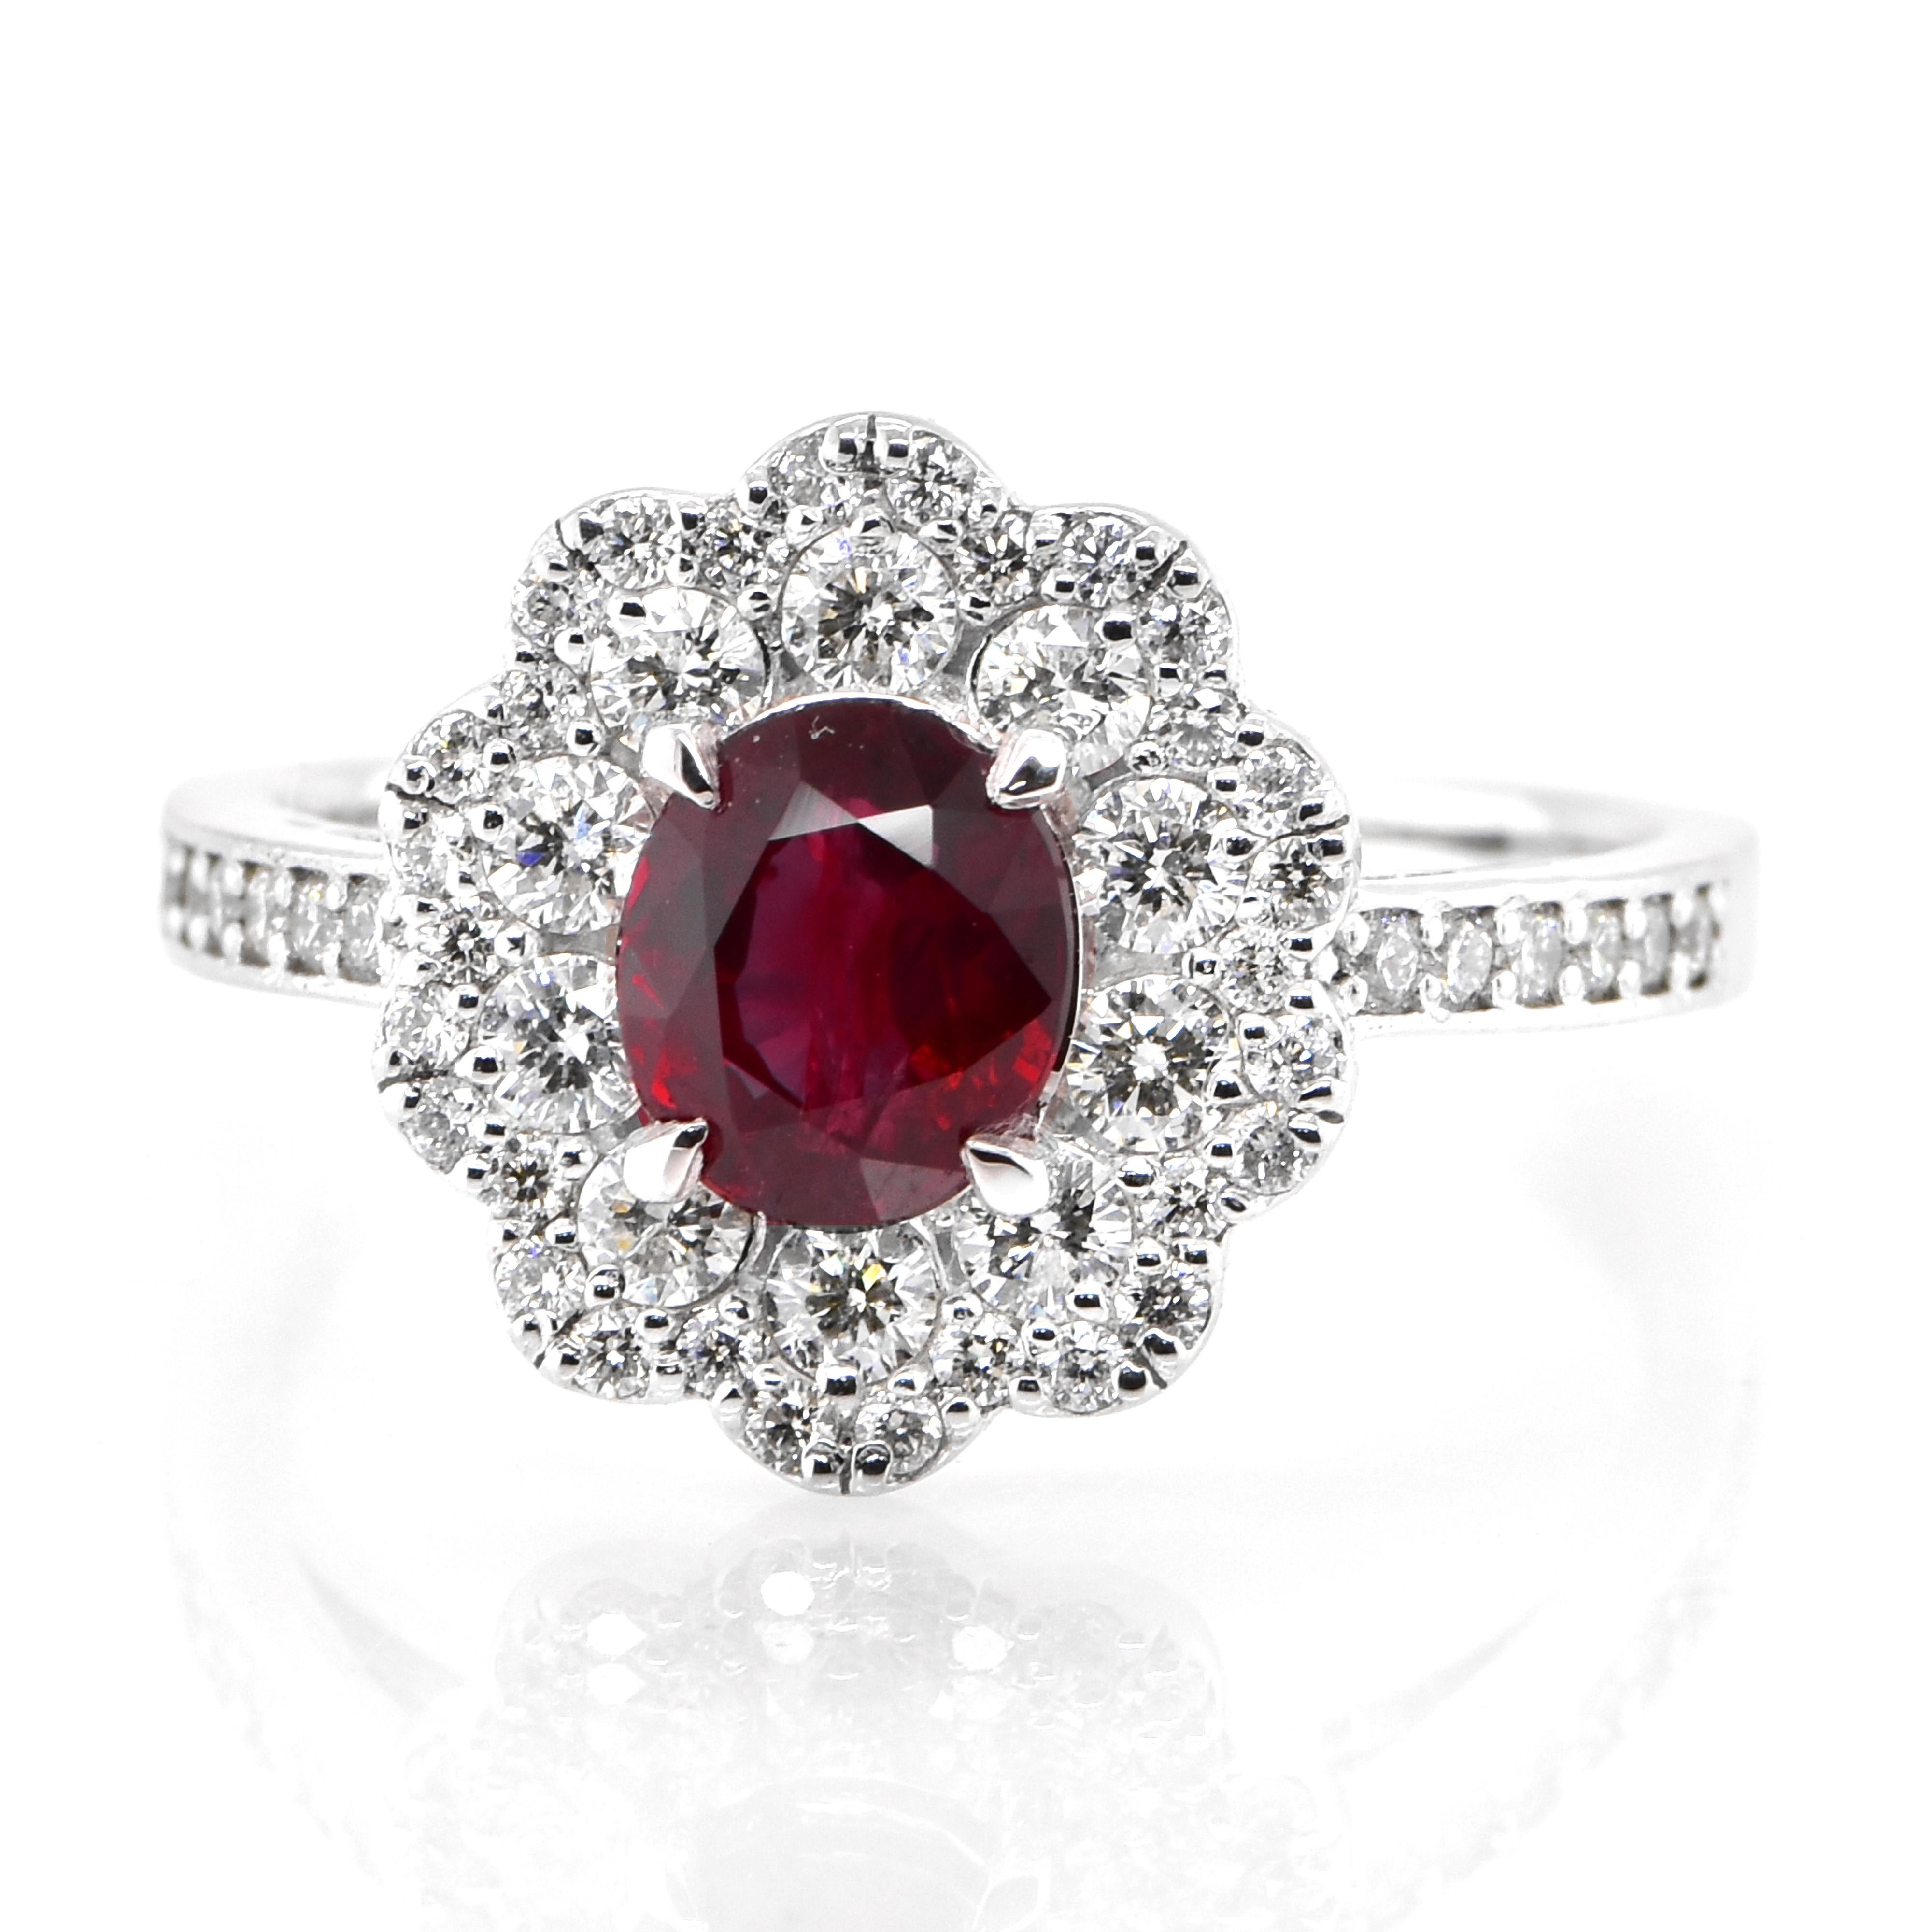 A beautiful Ring set in Platinum featuring a GIA Certified 1.13 Carat Natural Untreated (Unheated) Ruby and 0.59 Carat Diamonds. Rubies are referred to as 